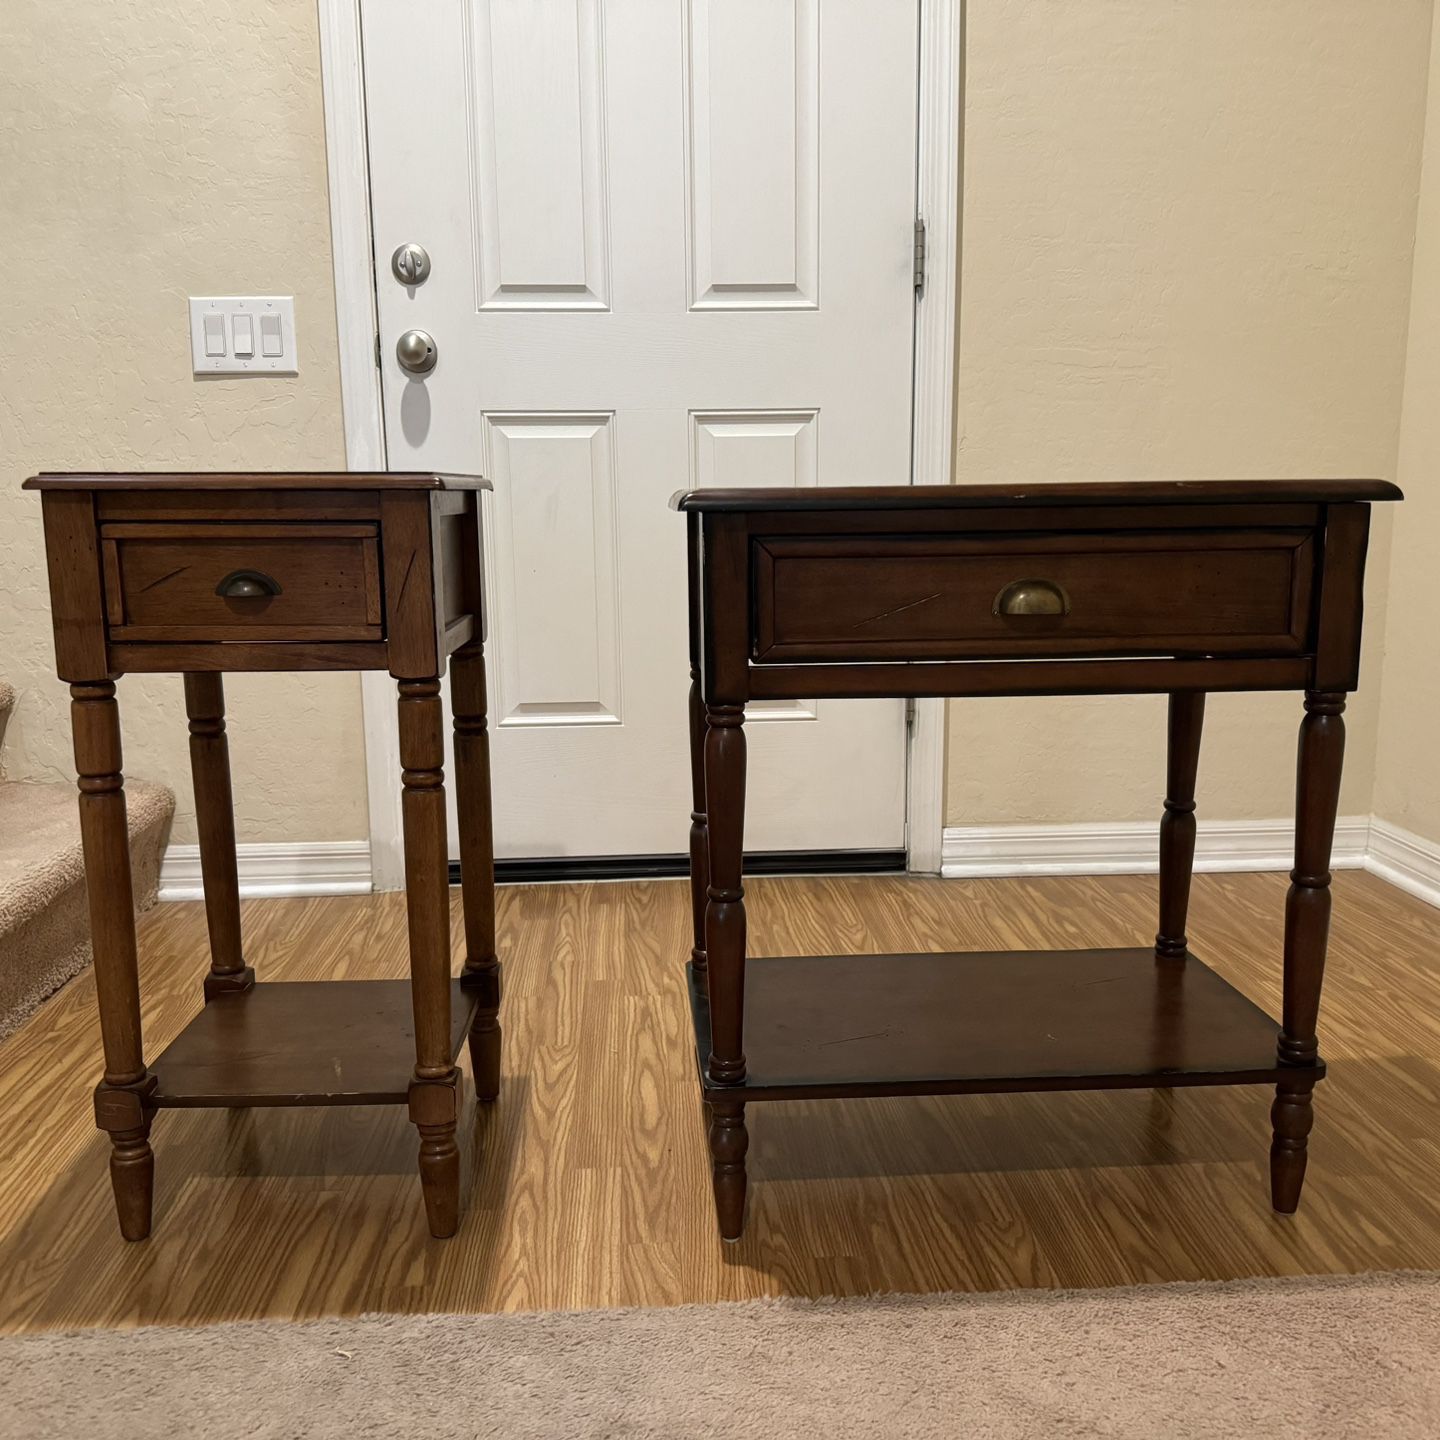 Entry Table and Side Table